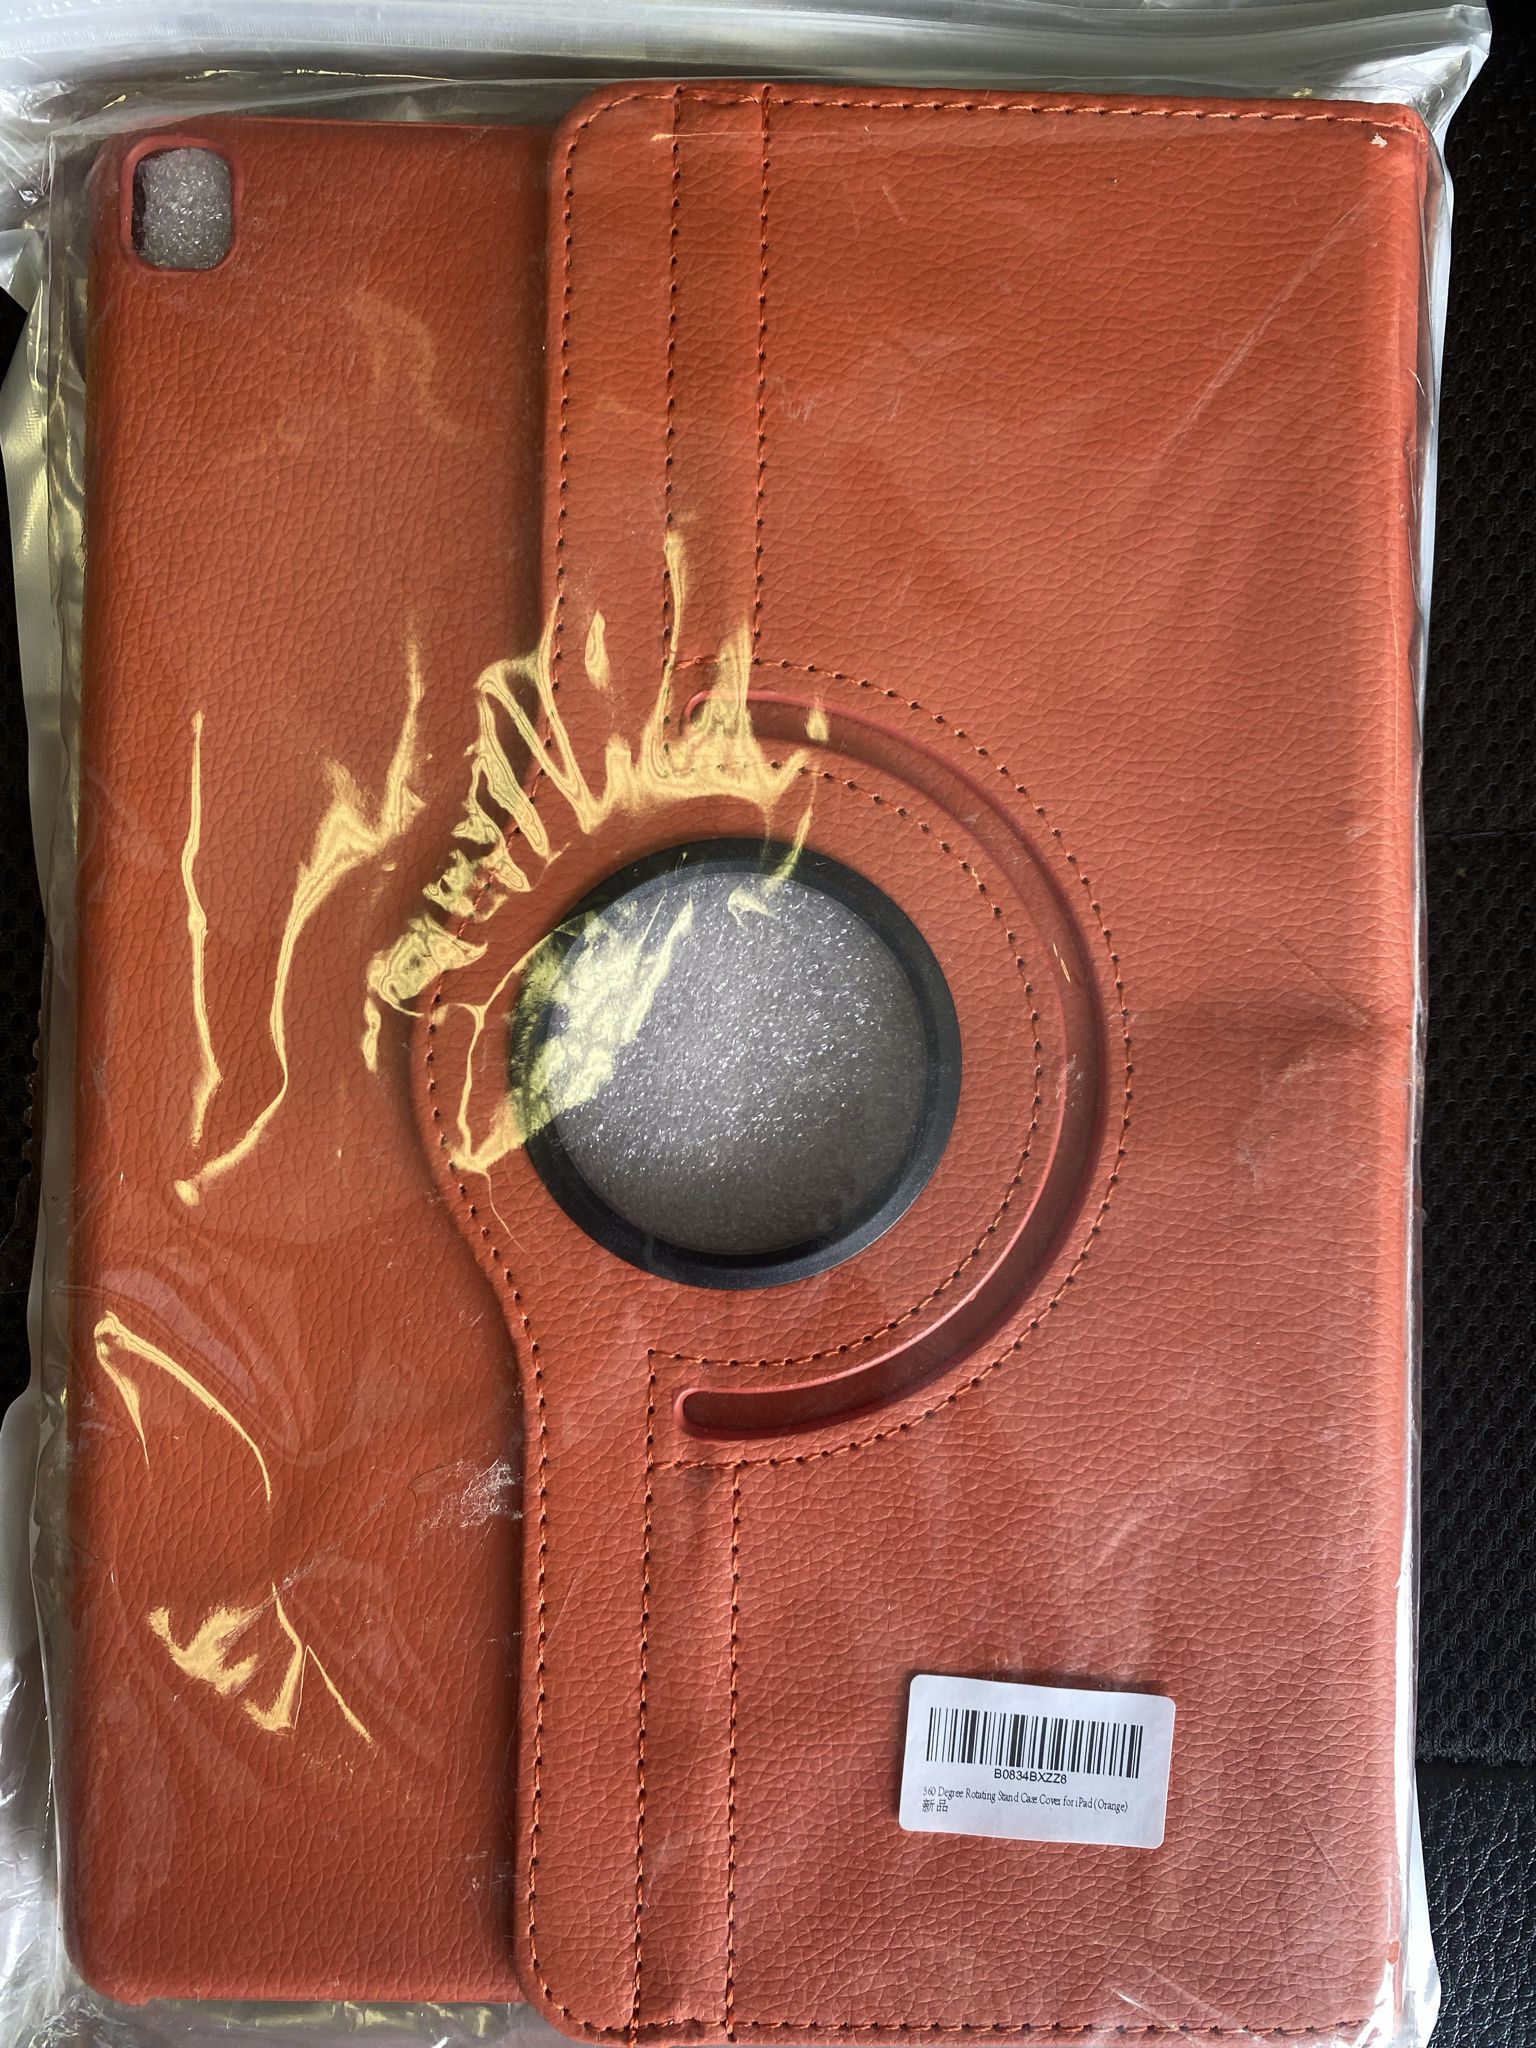 360 Degree ratating stand case cover for ipad orange color. Brand new